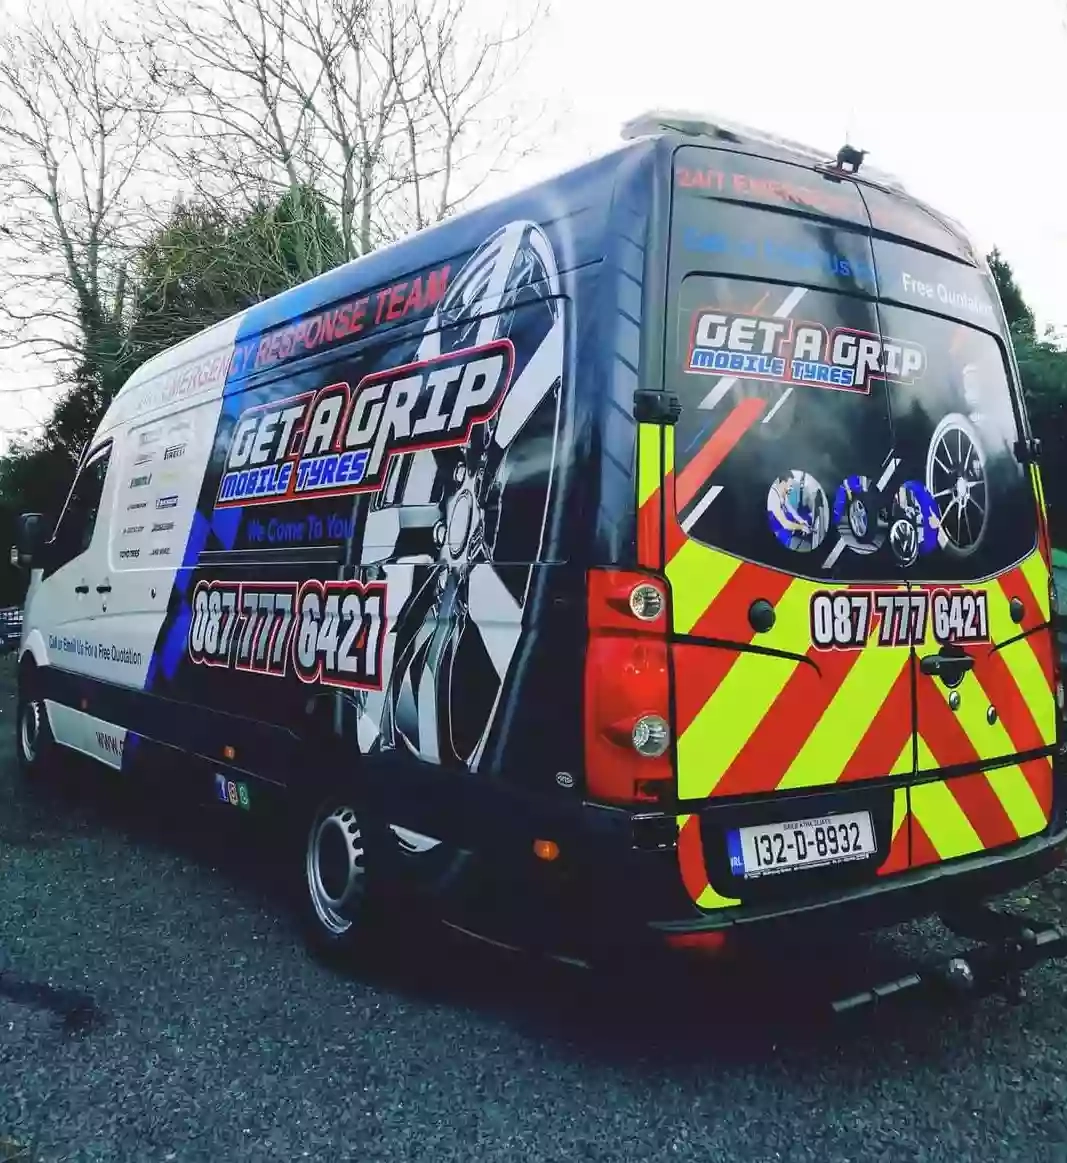 Car Battery Replacement Service Dublin "We Come To You"